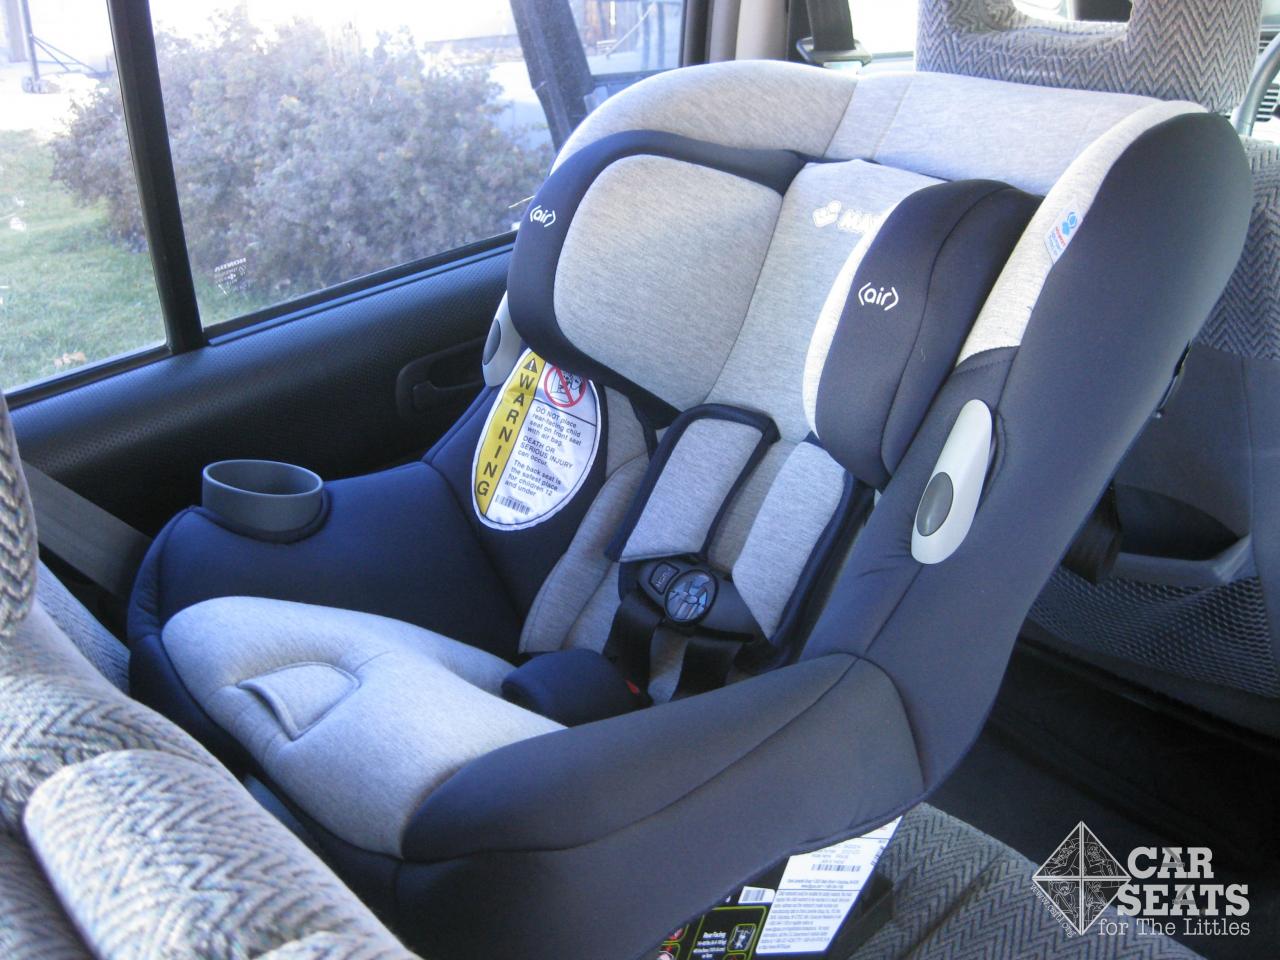 Maxi-Cosi Pria 85 Review - Car Seats For The Littles